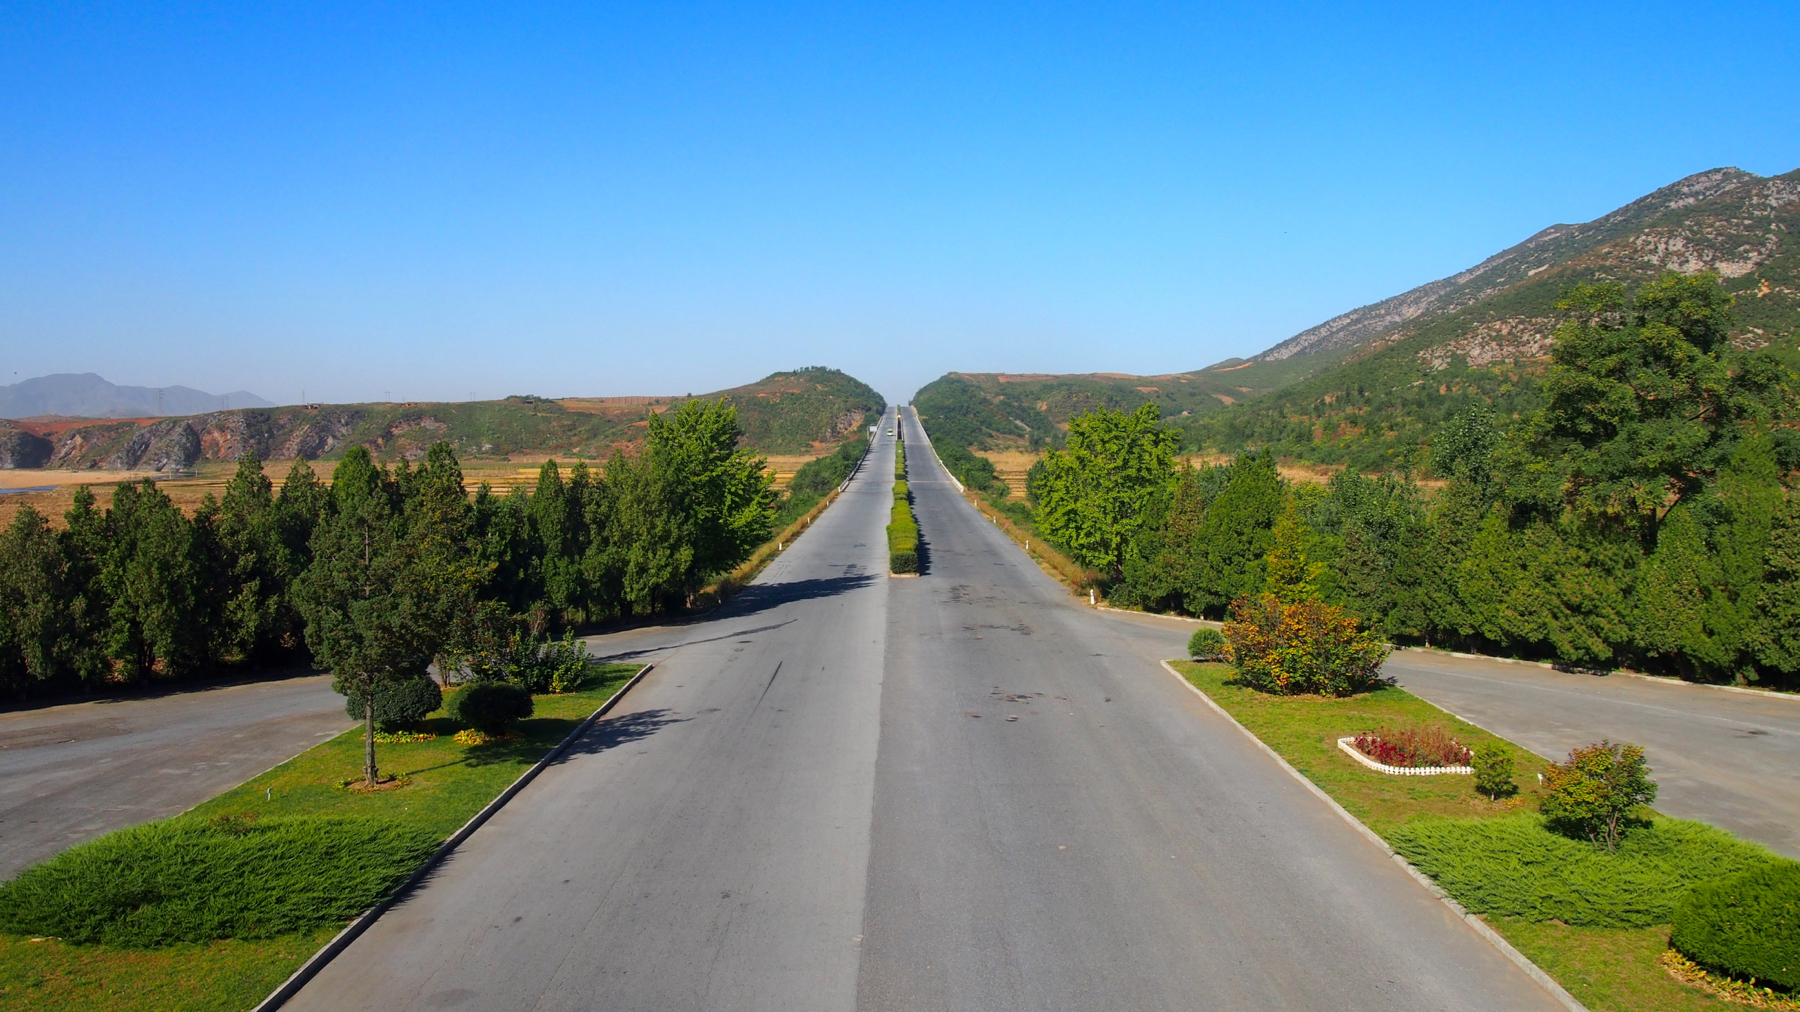 You may recognise this view from a famous VICE Magazine documentary whose crew stopped at a Tea House on the way to the DMZ. This is the view from that tea house. North Korean highways are extremely straight, cutting through mountains and hills as much as possible.